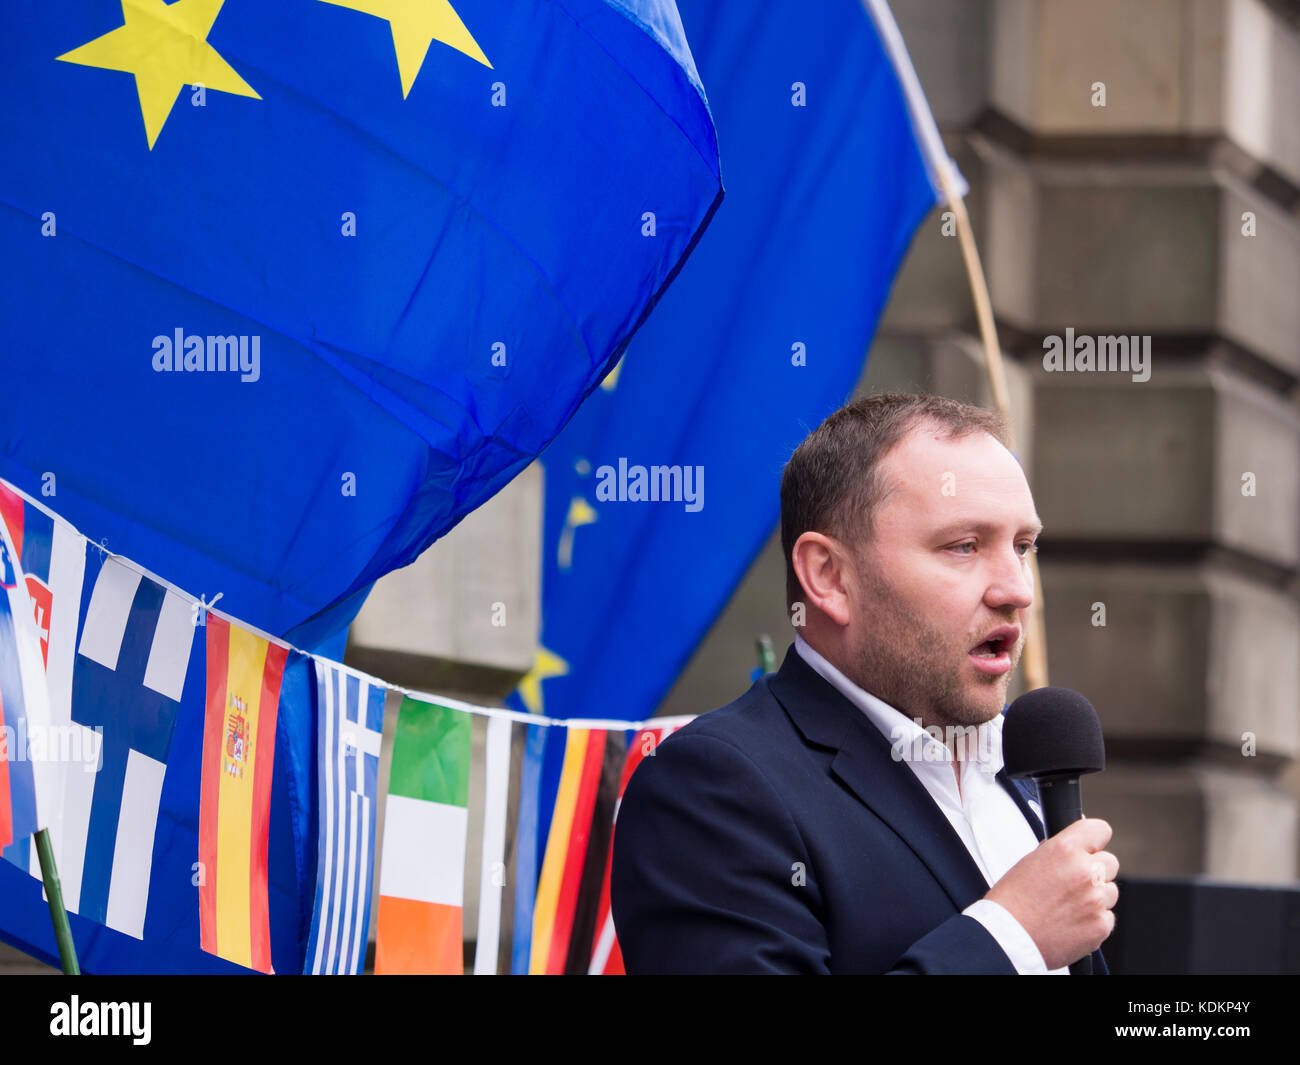 Edinburgh, UK - Oct 14, 2017: Ian Murray, Labour Party MP for Edinburgh South is pictured as he talks to Pro EU supporters at an anti Brexit rally in Edinburgh. The rally was one of 12 held across the UK to allow people to show their support for the UK remaining part of the European Union. Credit: AC Images/Alamy Live News Stock Photo